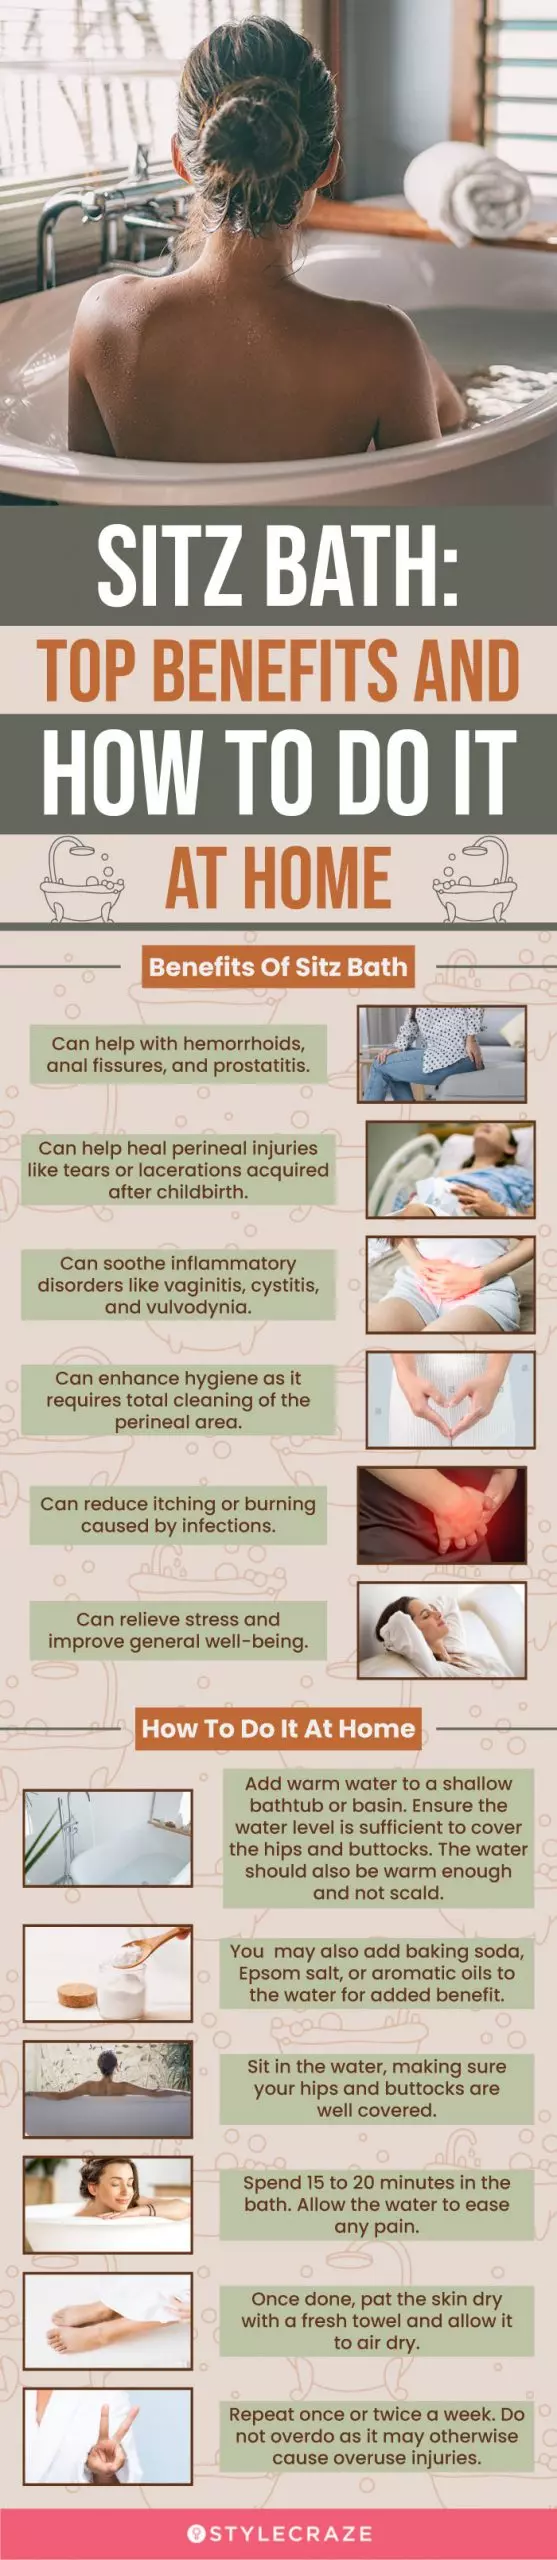 sitz bath top benefits and how to do it at home (infographic)